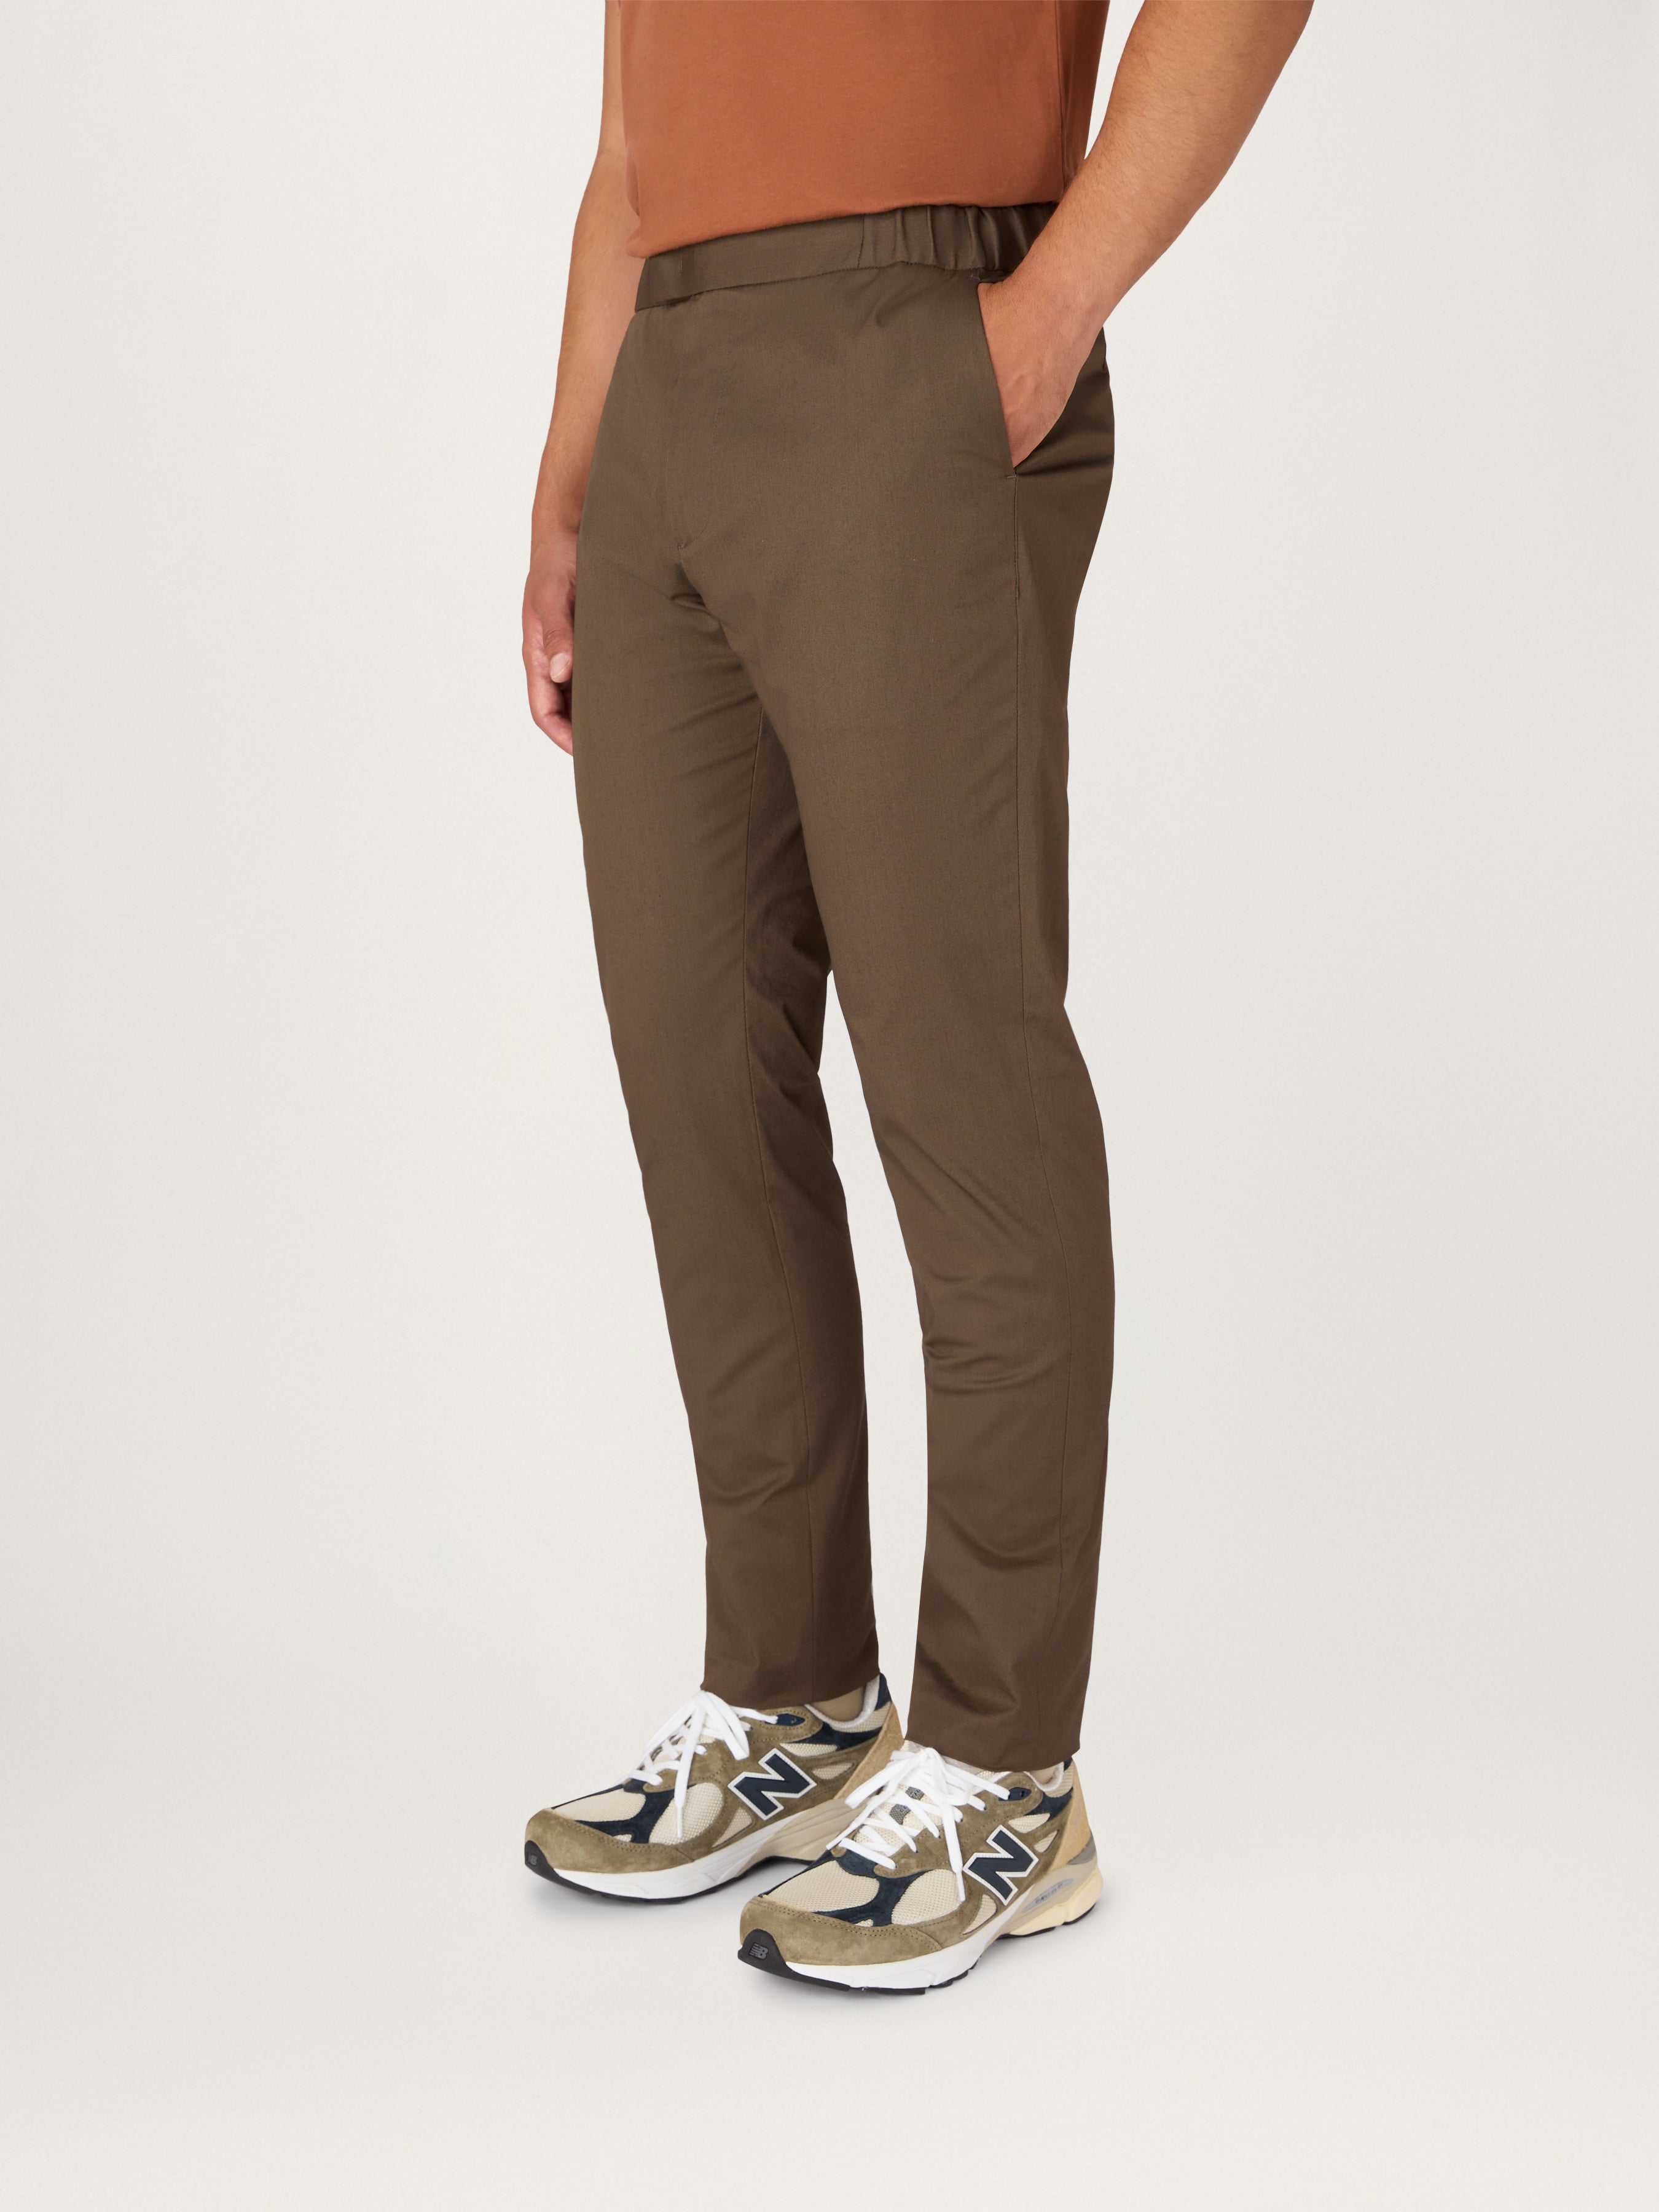 Buy Marks & Spencer Boys High Rise Trousers - Trousers for Boys 21559024 |  Myntra